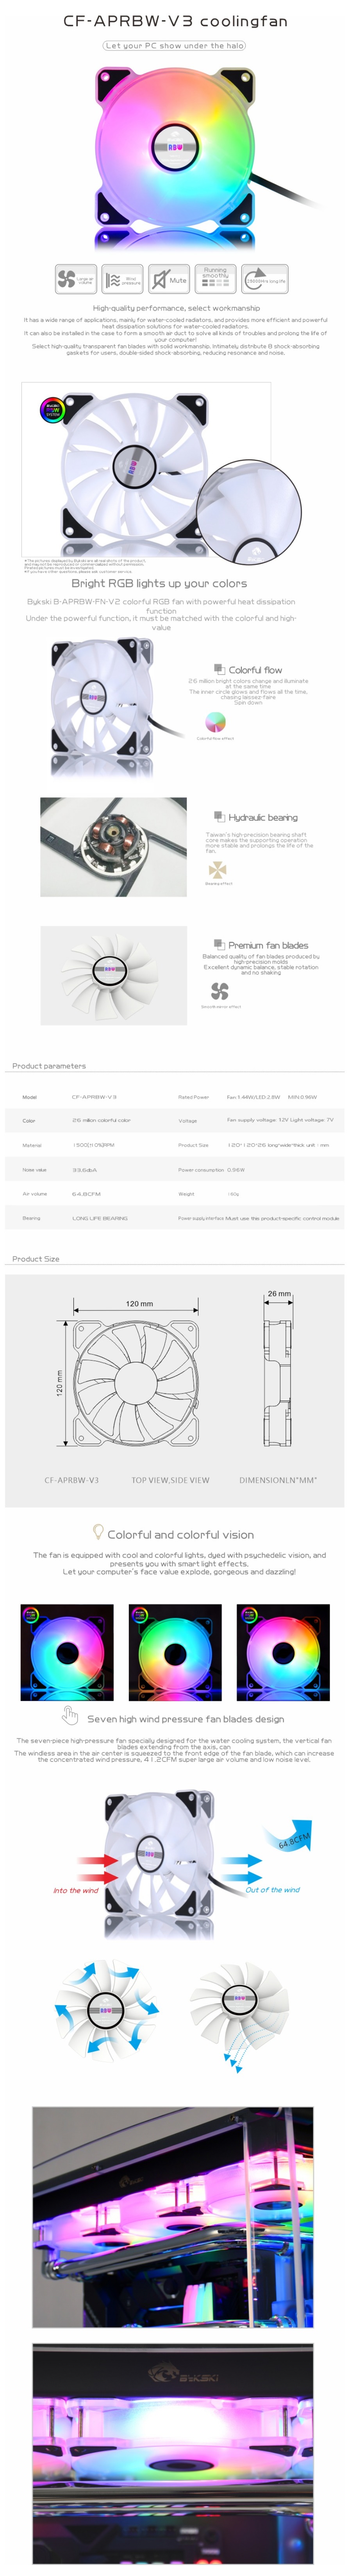 A large marketing image providing additional information about the product Bykski 120mm RBW Addressable RGB 120mm Fan - Additional alt info not provided